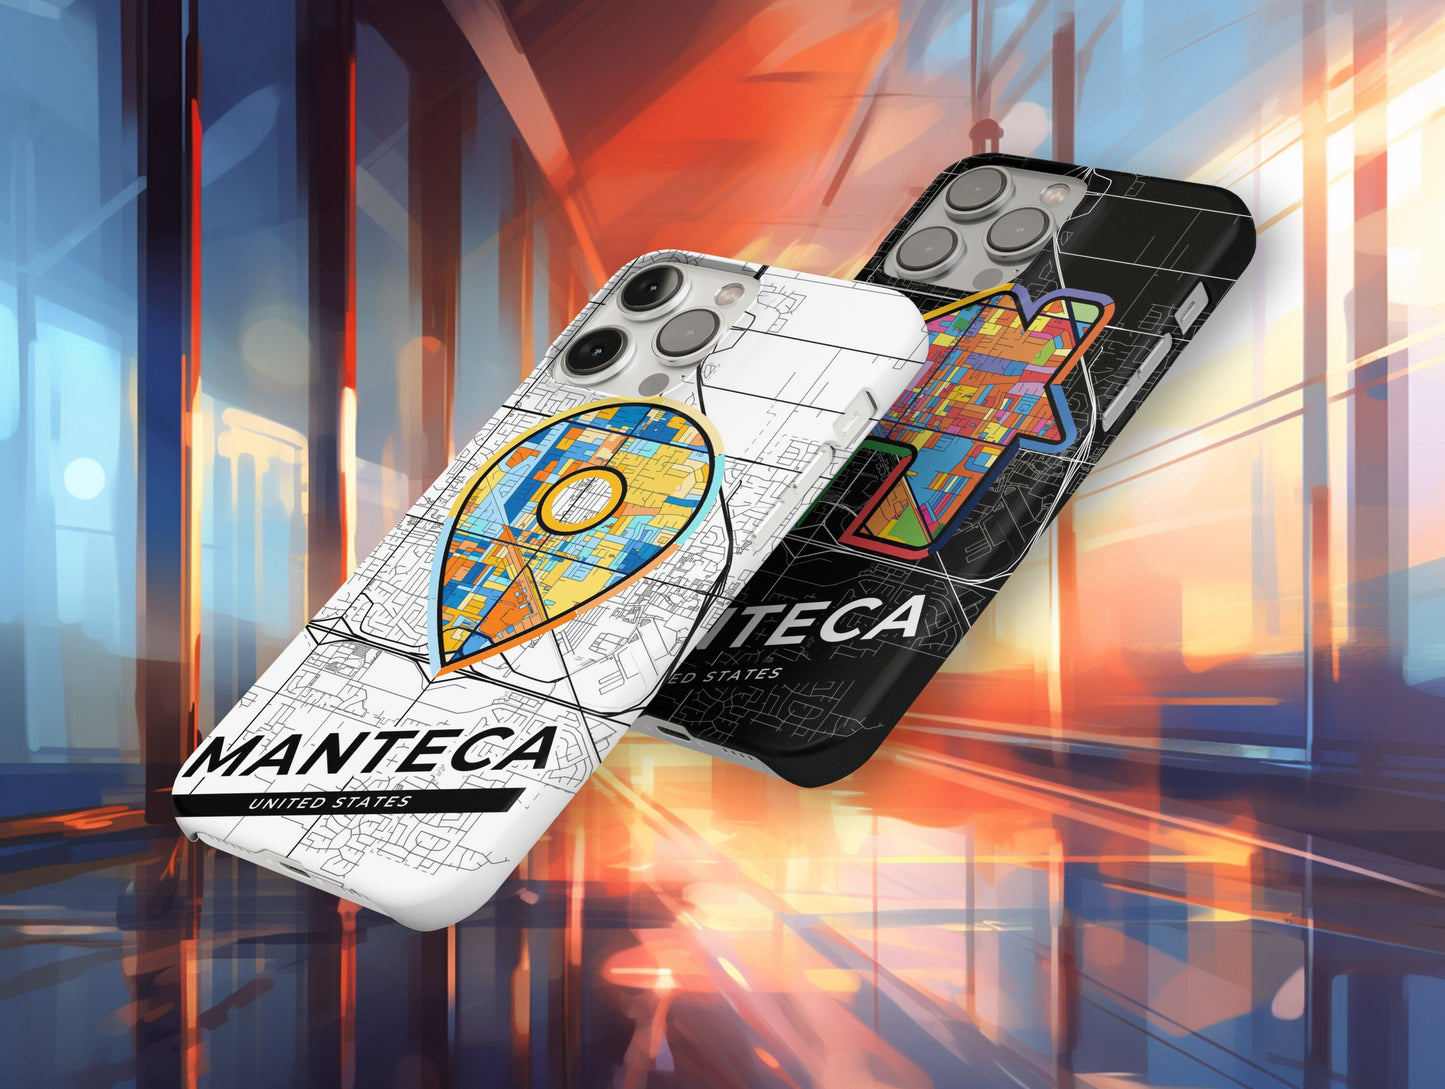 Manteca California slim phone case with colorful icon. Birthday, wedding or housewarming gift. Couple match cases.